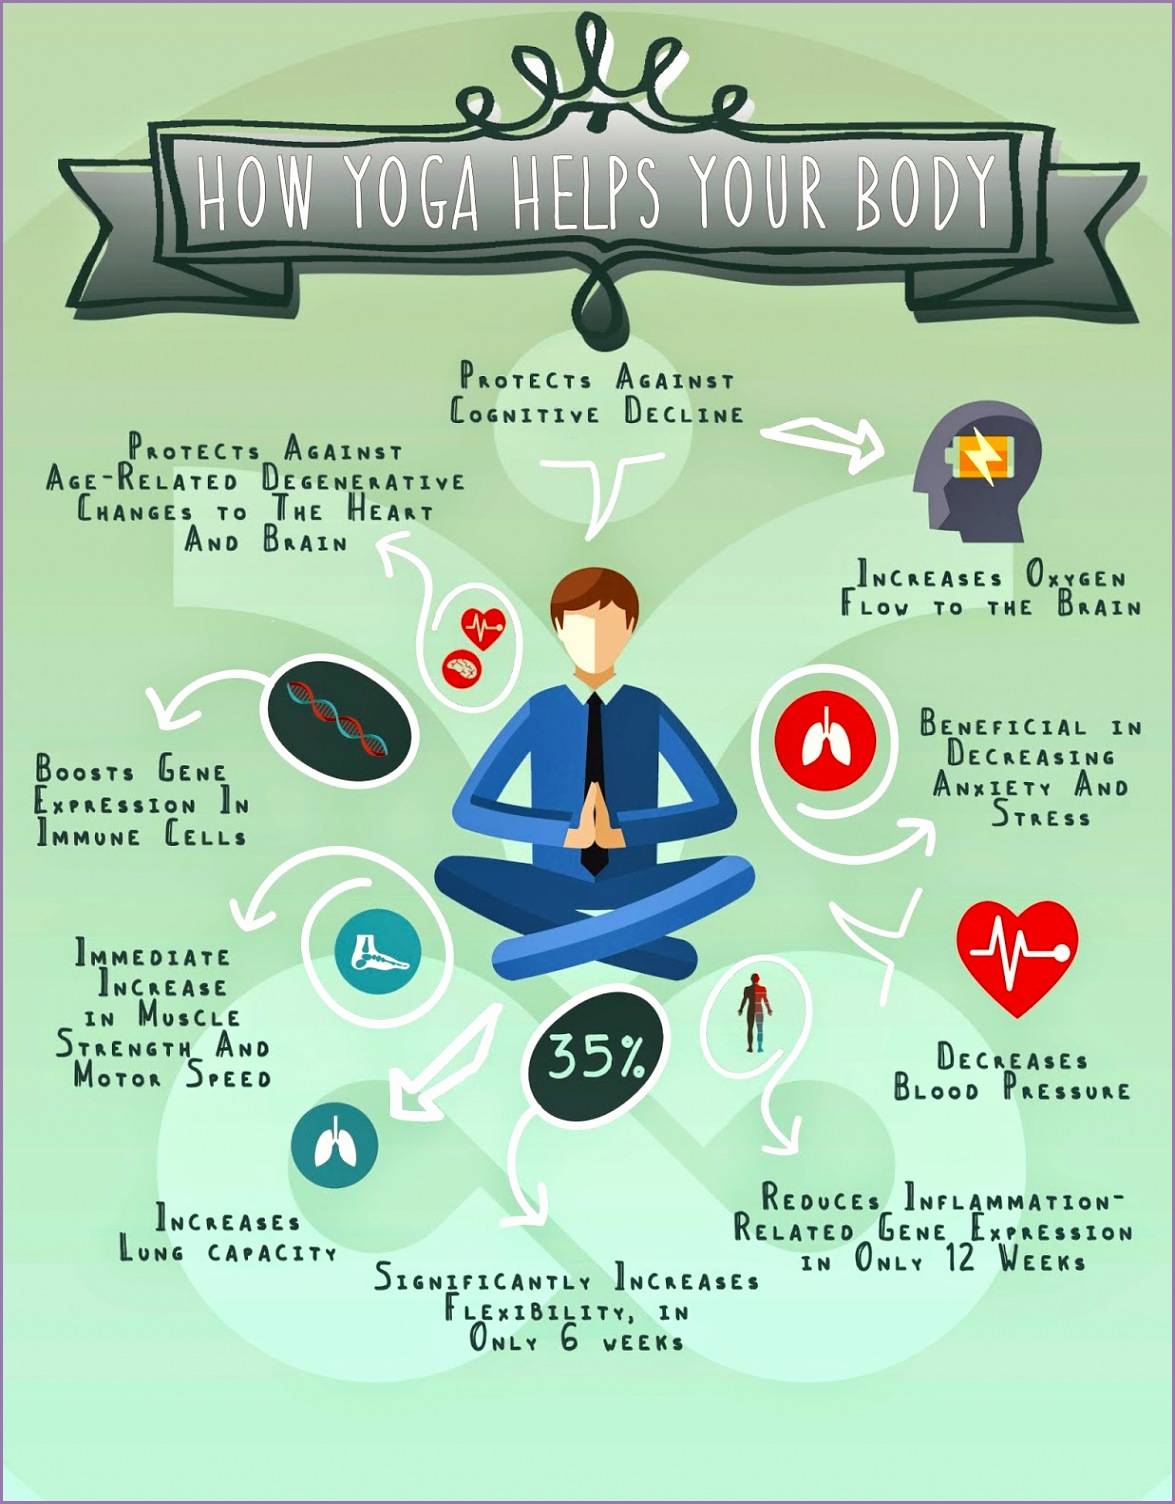 How Yoga Helps Your Body